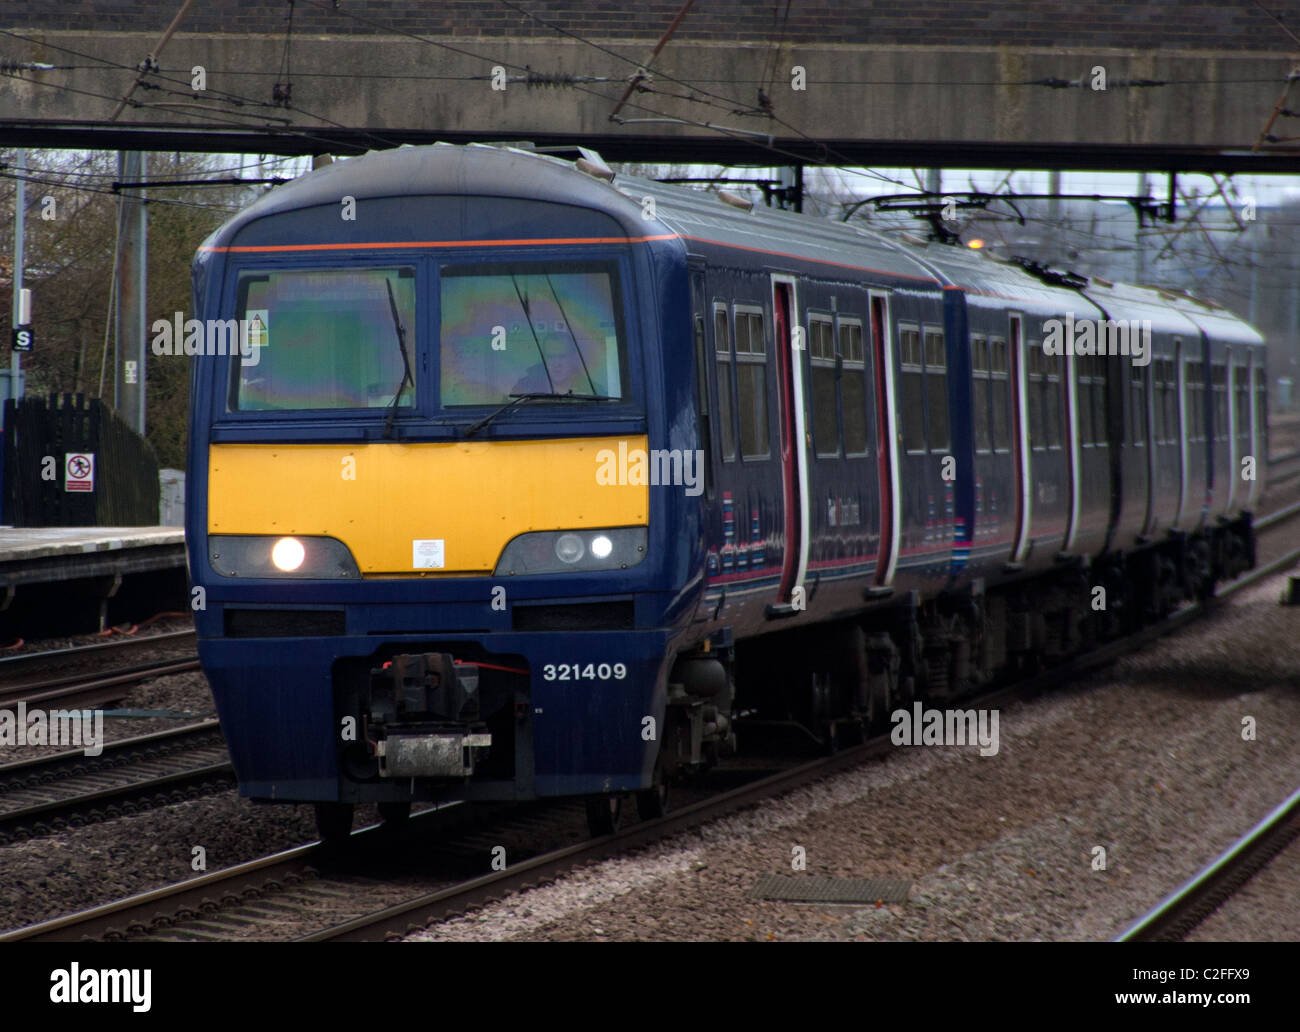 British Rail Class 321 4 car train of First Capitol Connect Stock Photo